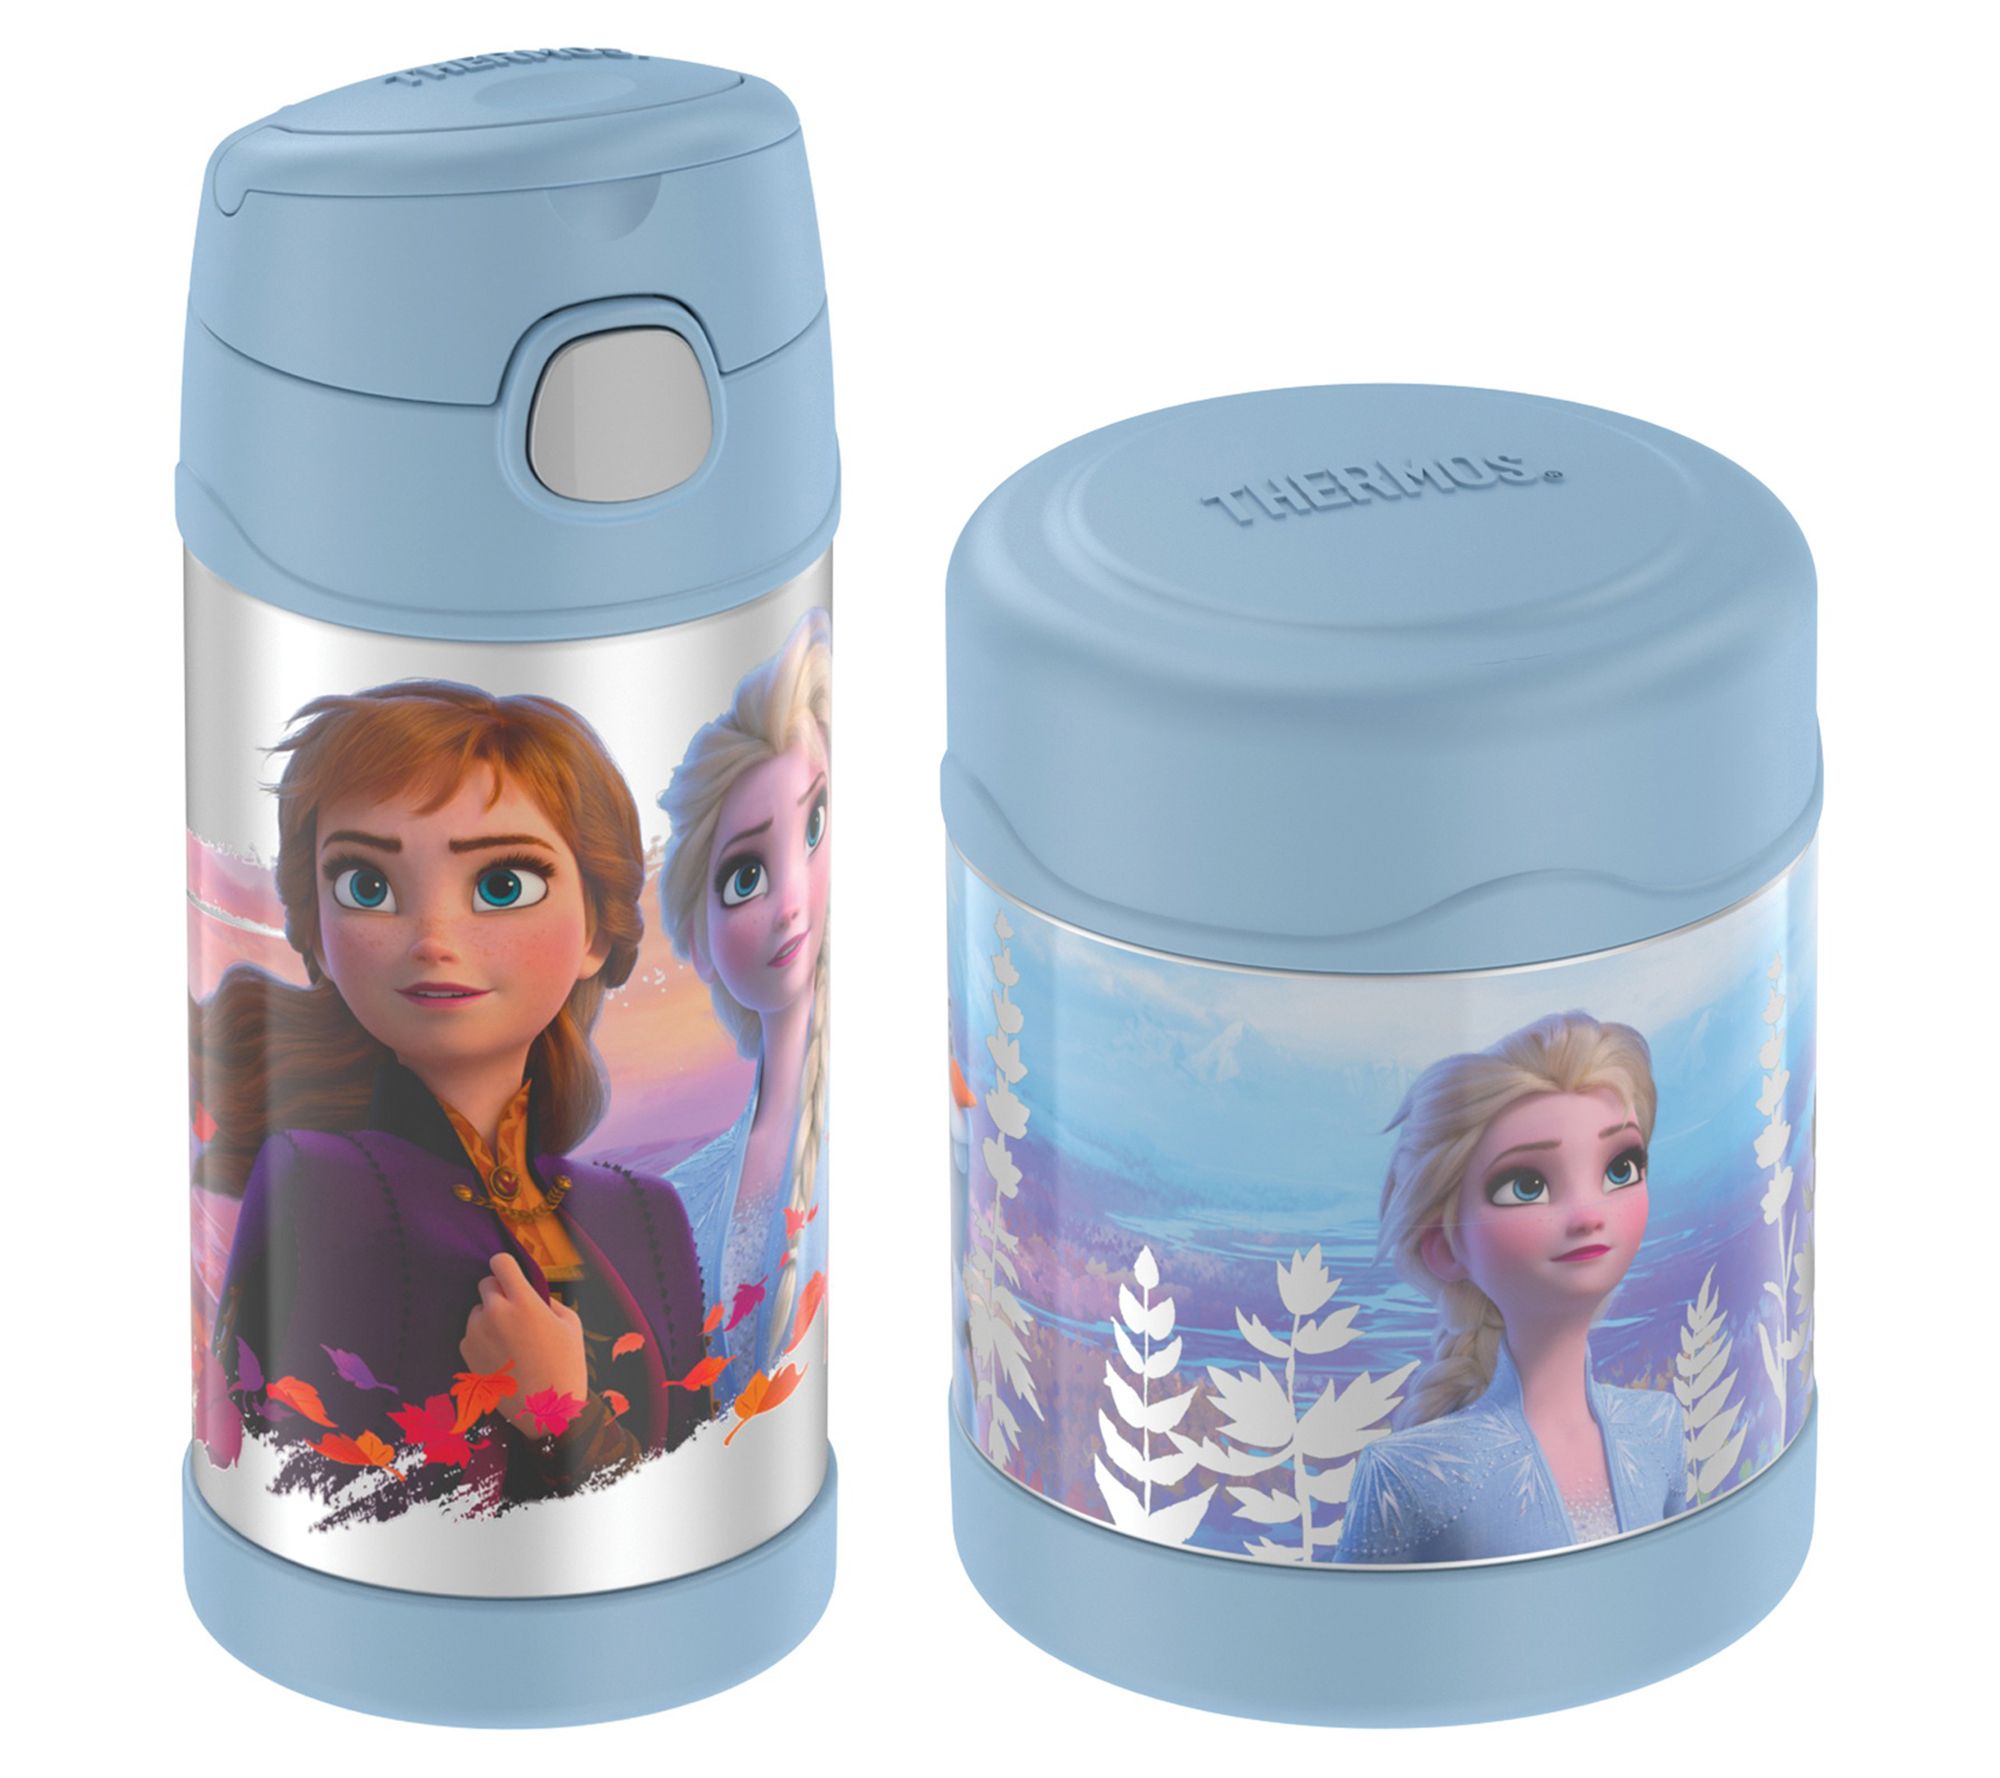 thermos funtainer food flask